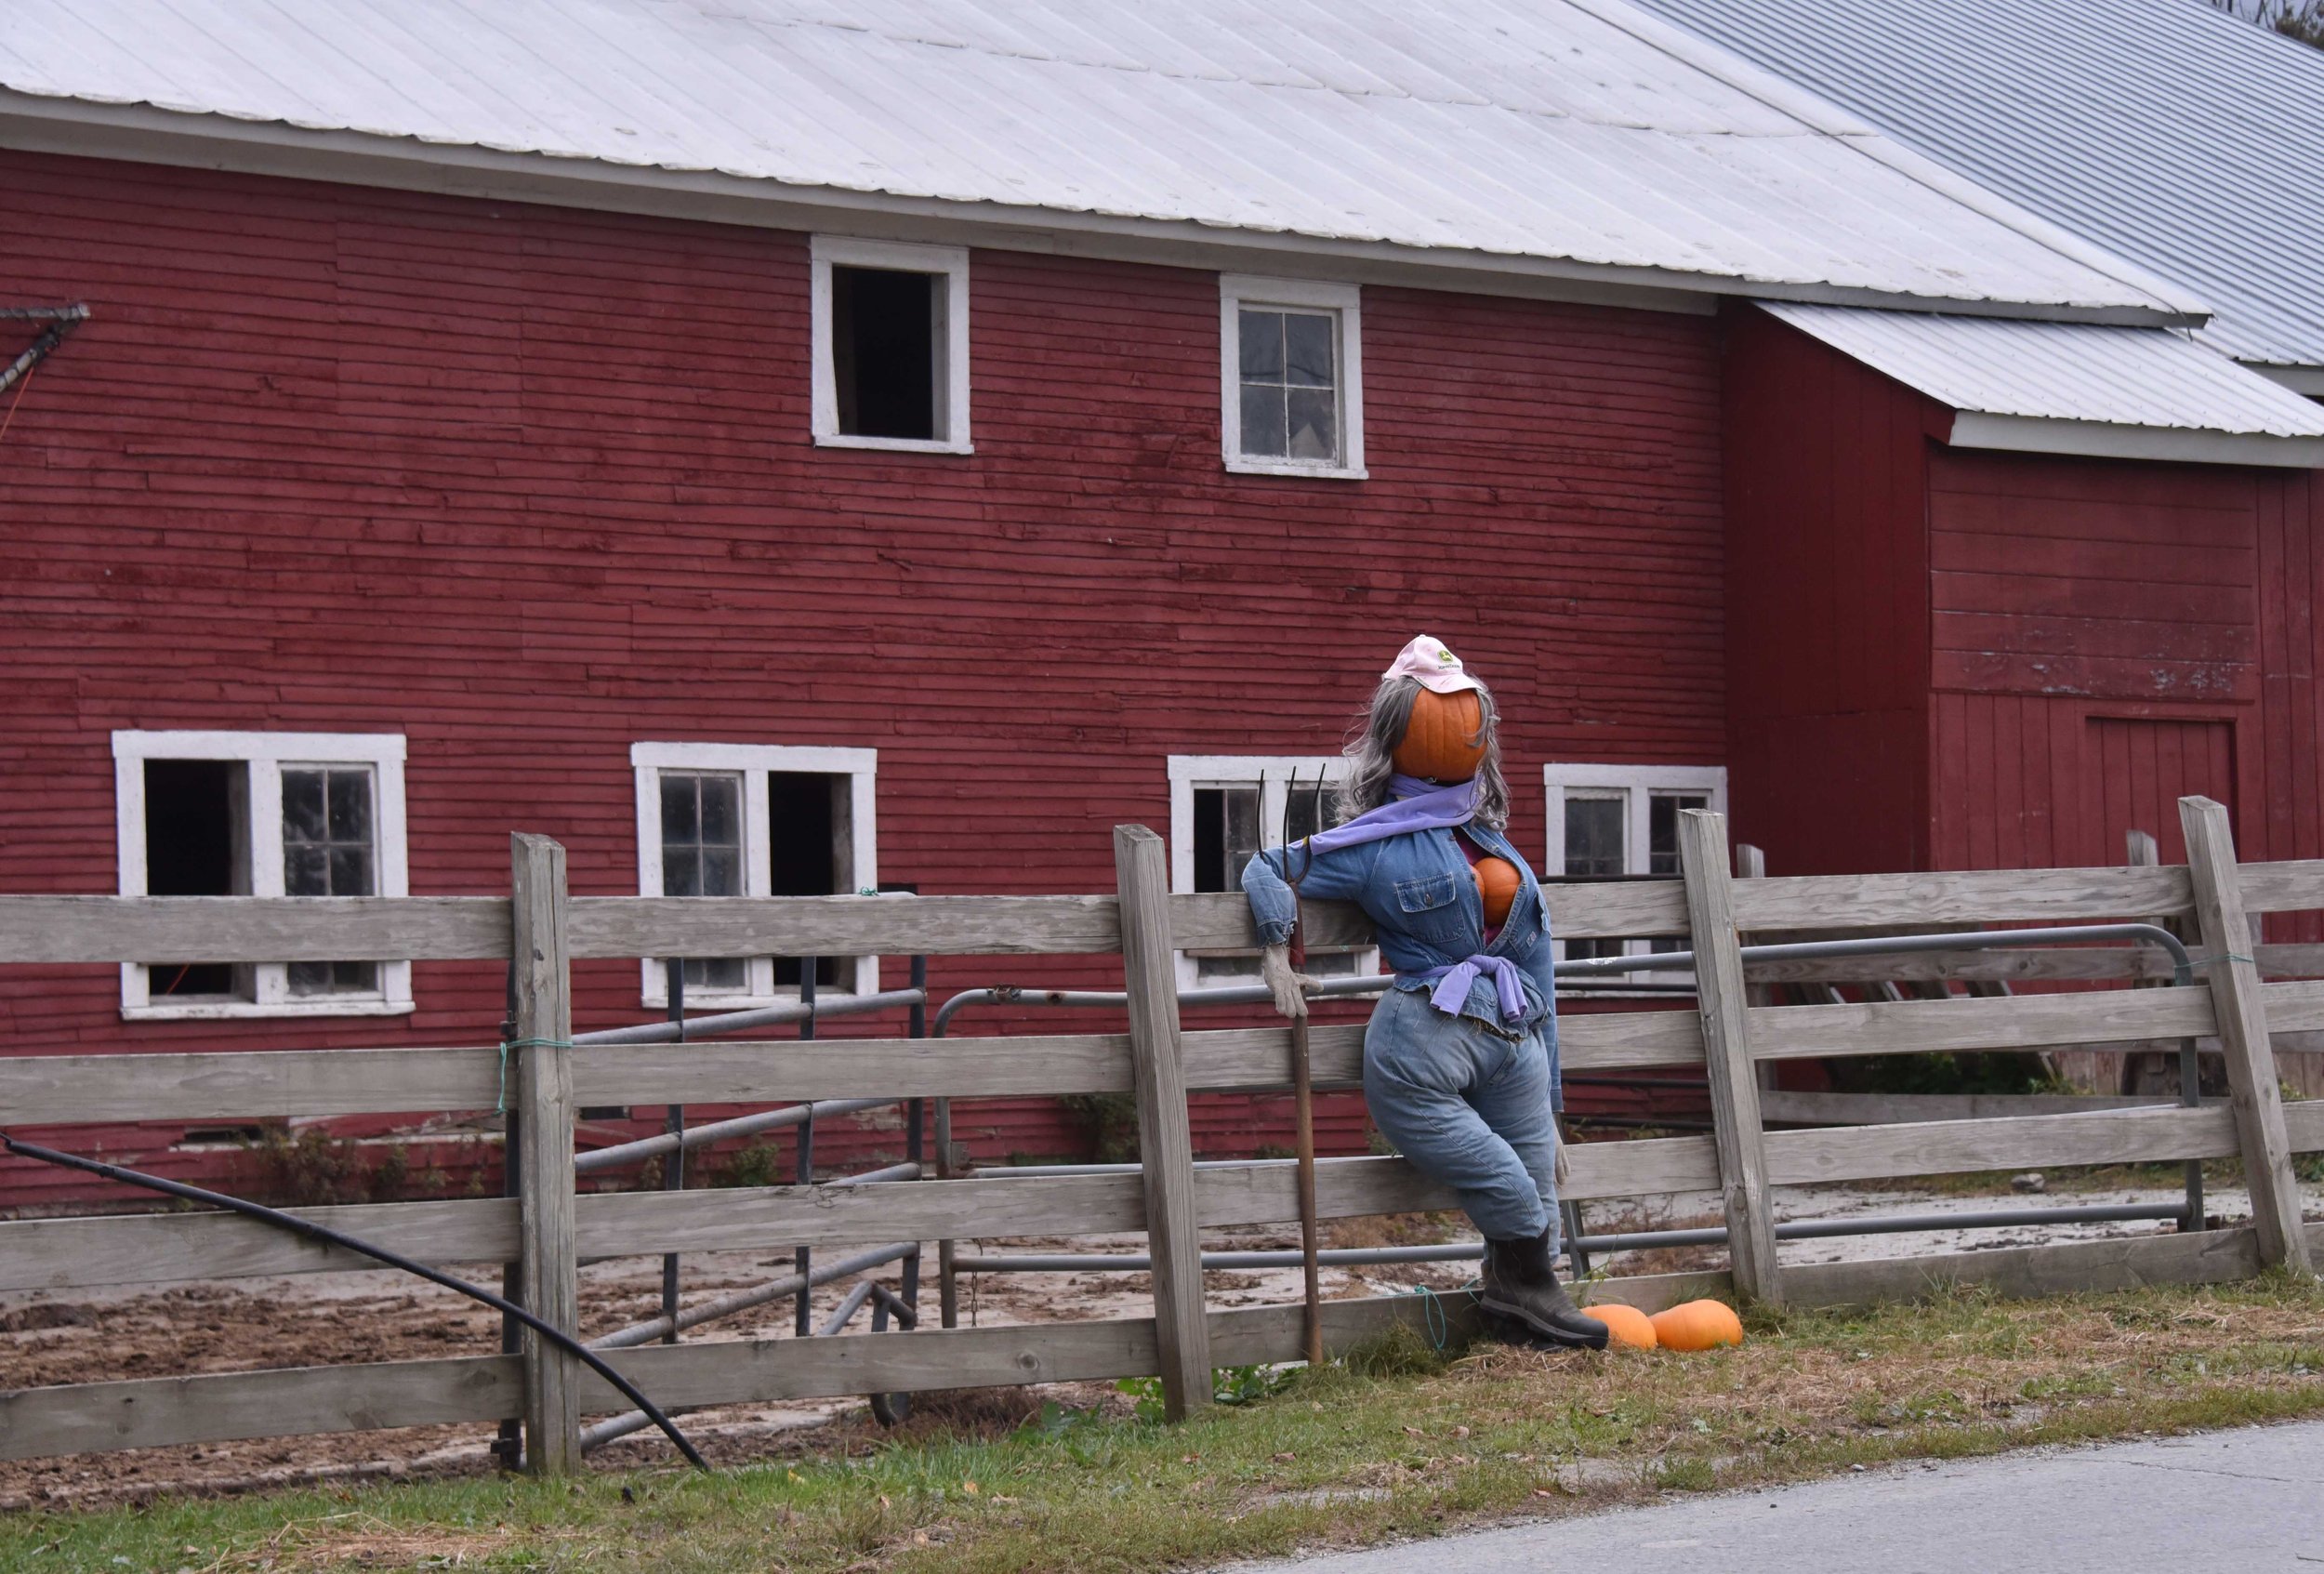  The Davis Farm doesn’t disappoint with some fall cheeky fun. Photo by Gordon Miller 